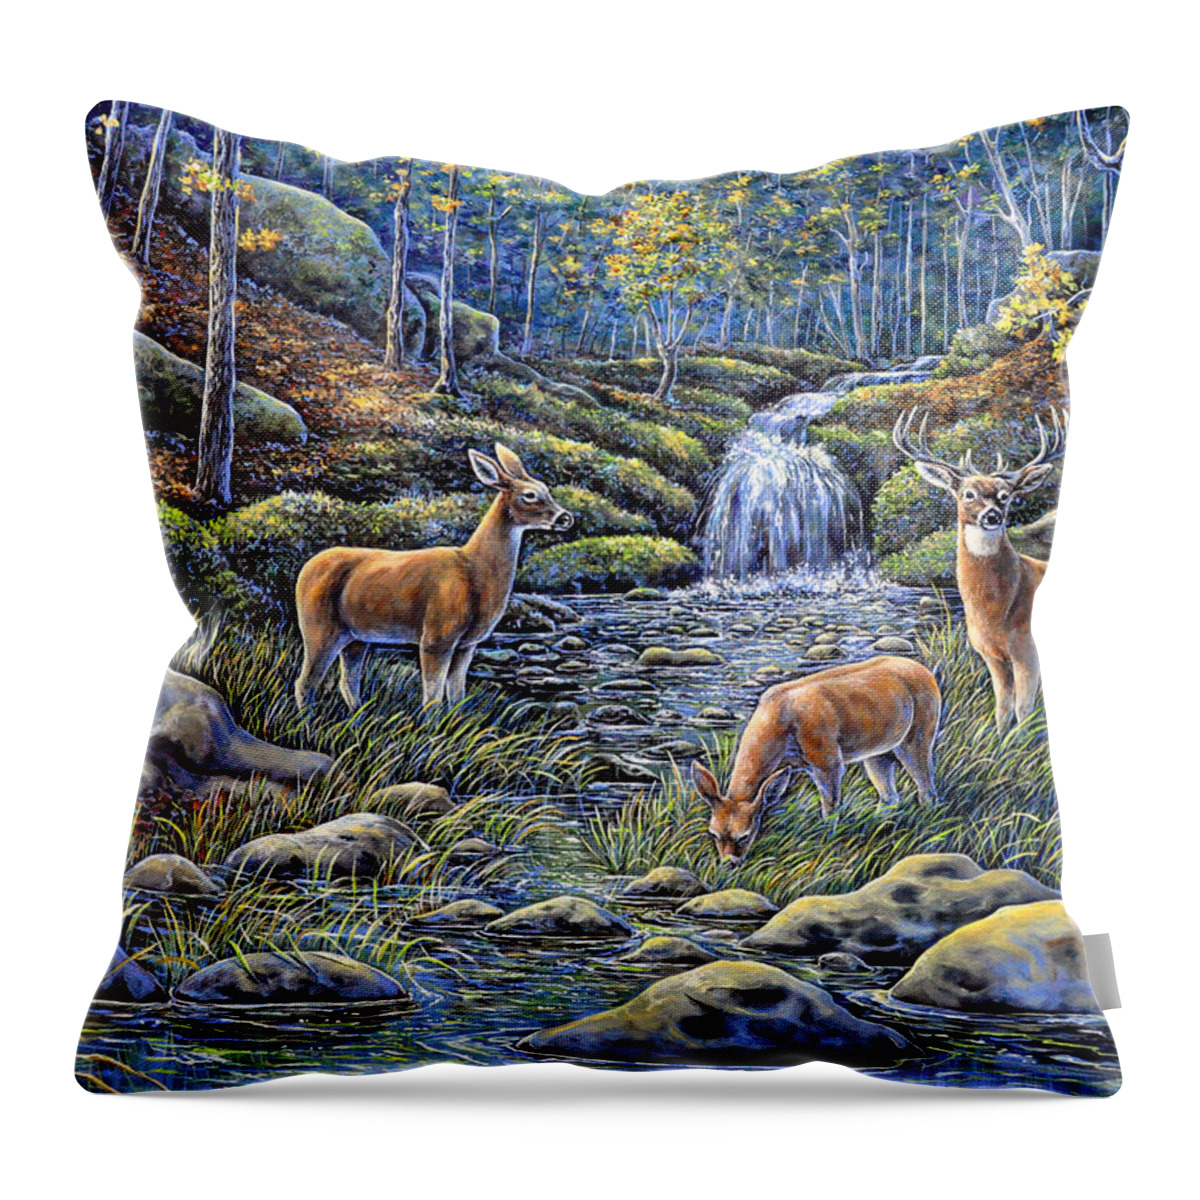 Landscape Mountains Waterfall Woods Stream Deer Sanctuary Nature Animal Trees Throw Pillow featuring the painting Woodland Sanctuary by Gail Butler